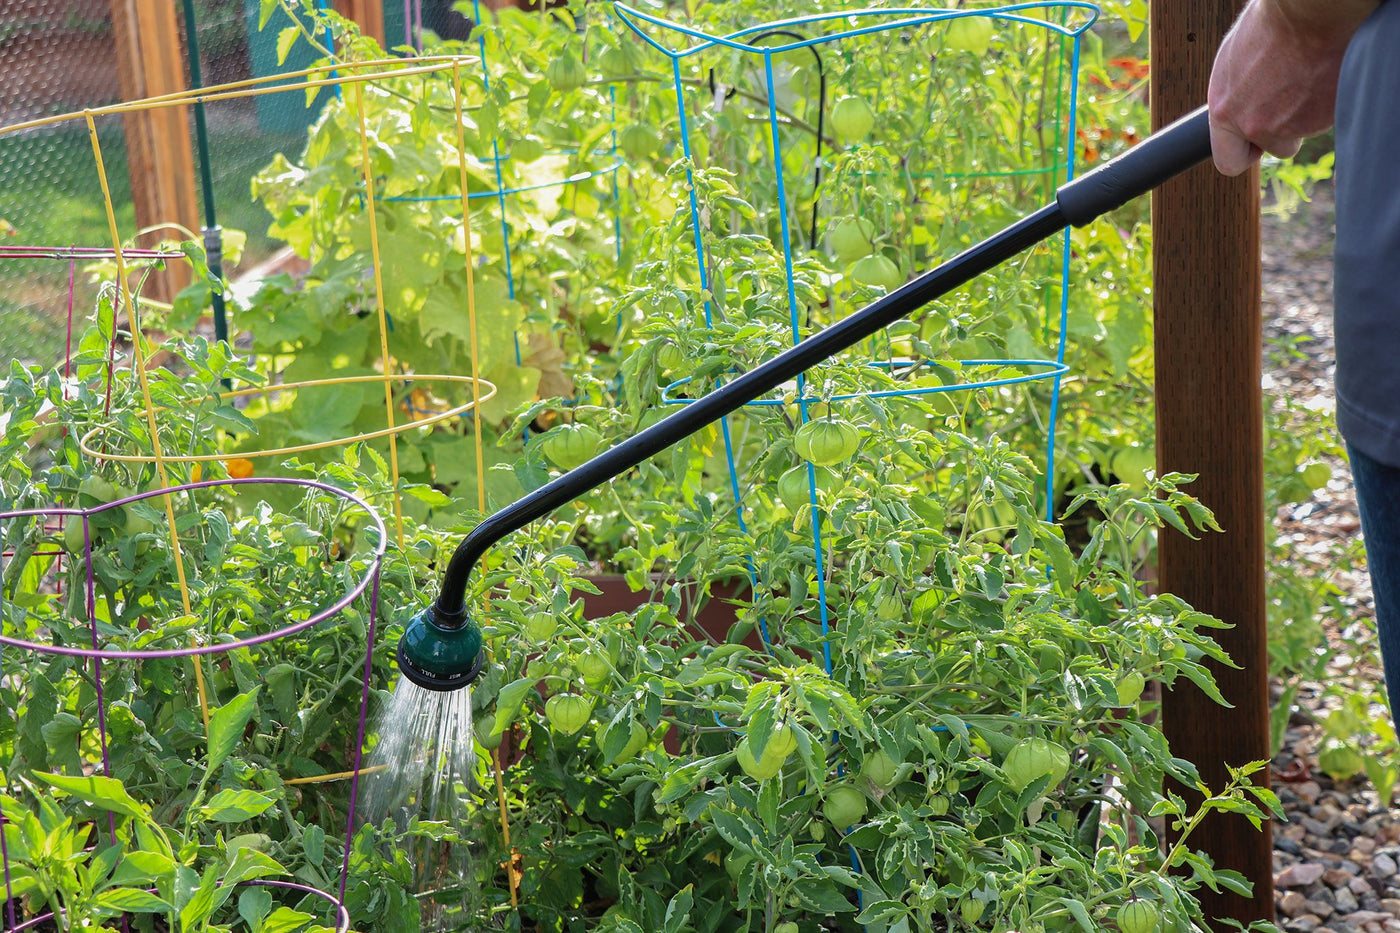 36-inch 9-pattern shut-off lever wand watering tomato plants.